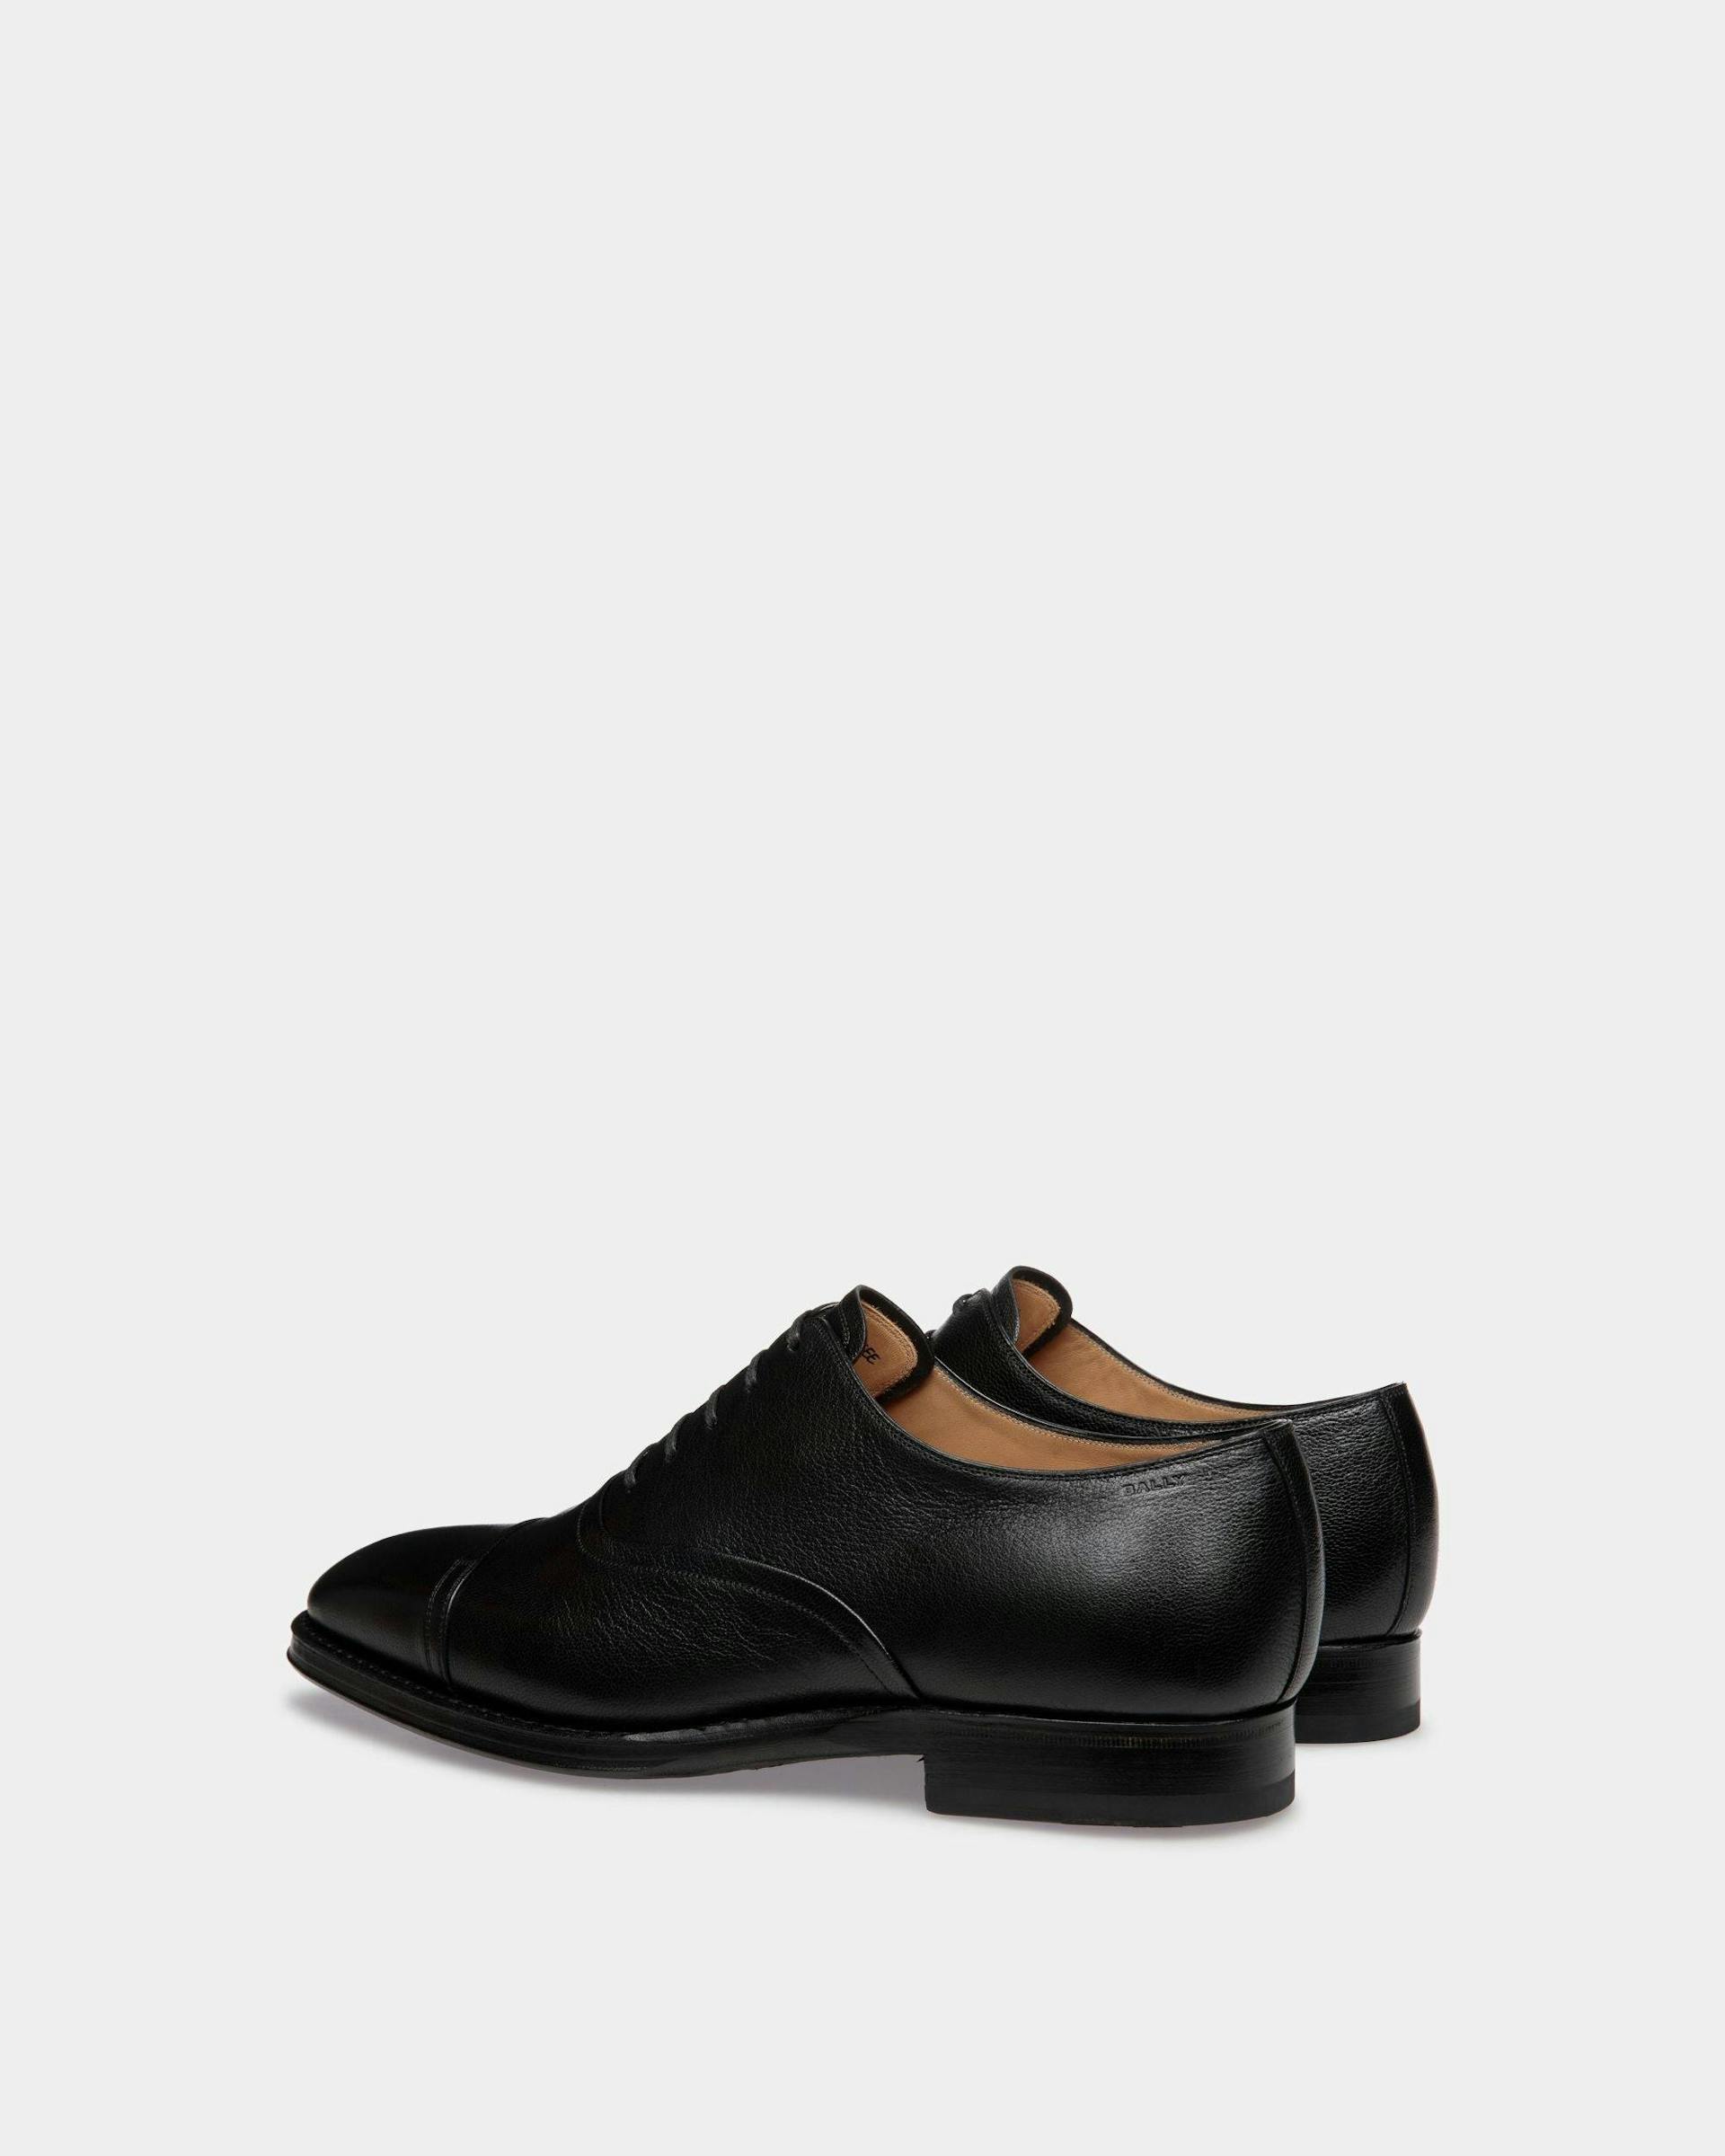 Men's Scribe Oxford in Black Grained Leather | Bally | Still Life 3/4 Back